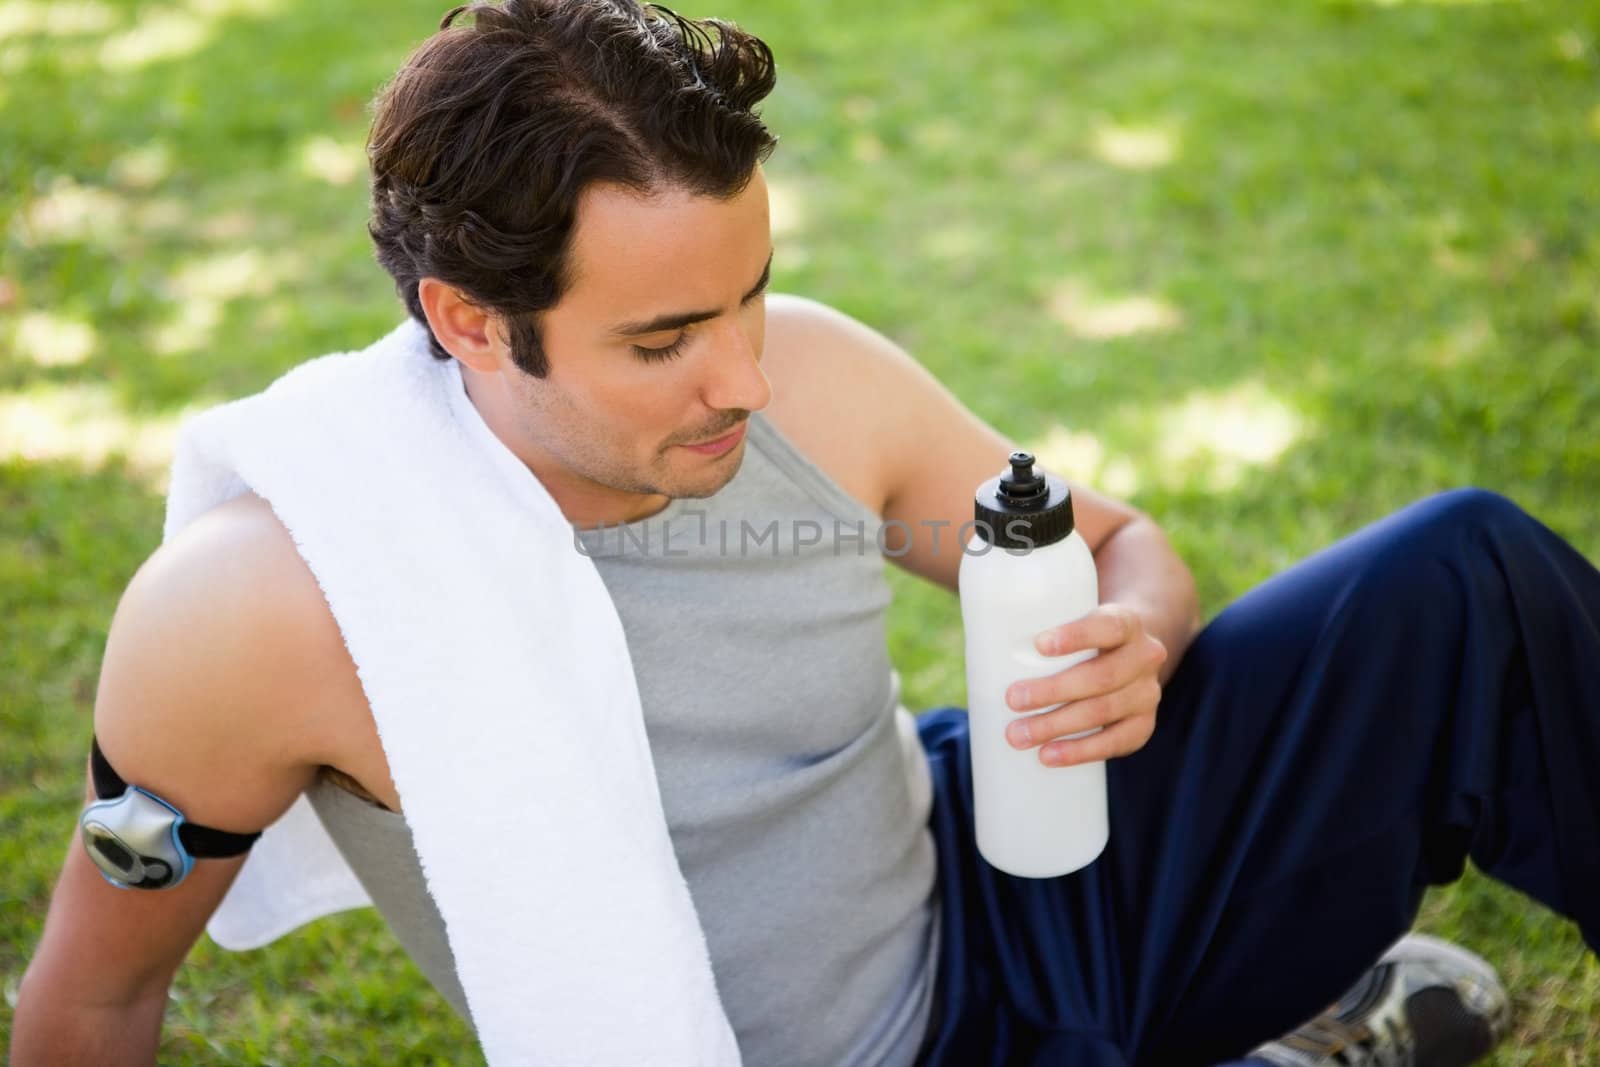 Man with a white towel resting on his shoulder looking at a sports bottle while he is sitting on the grass